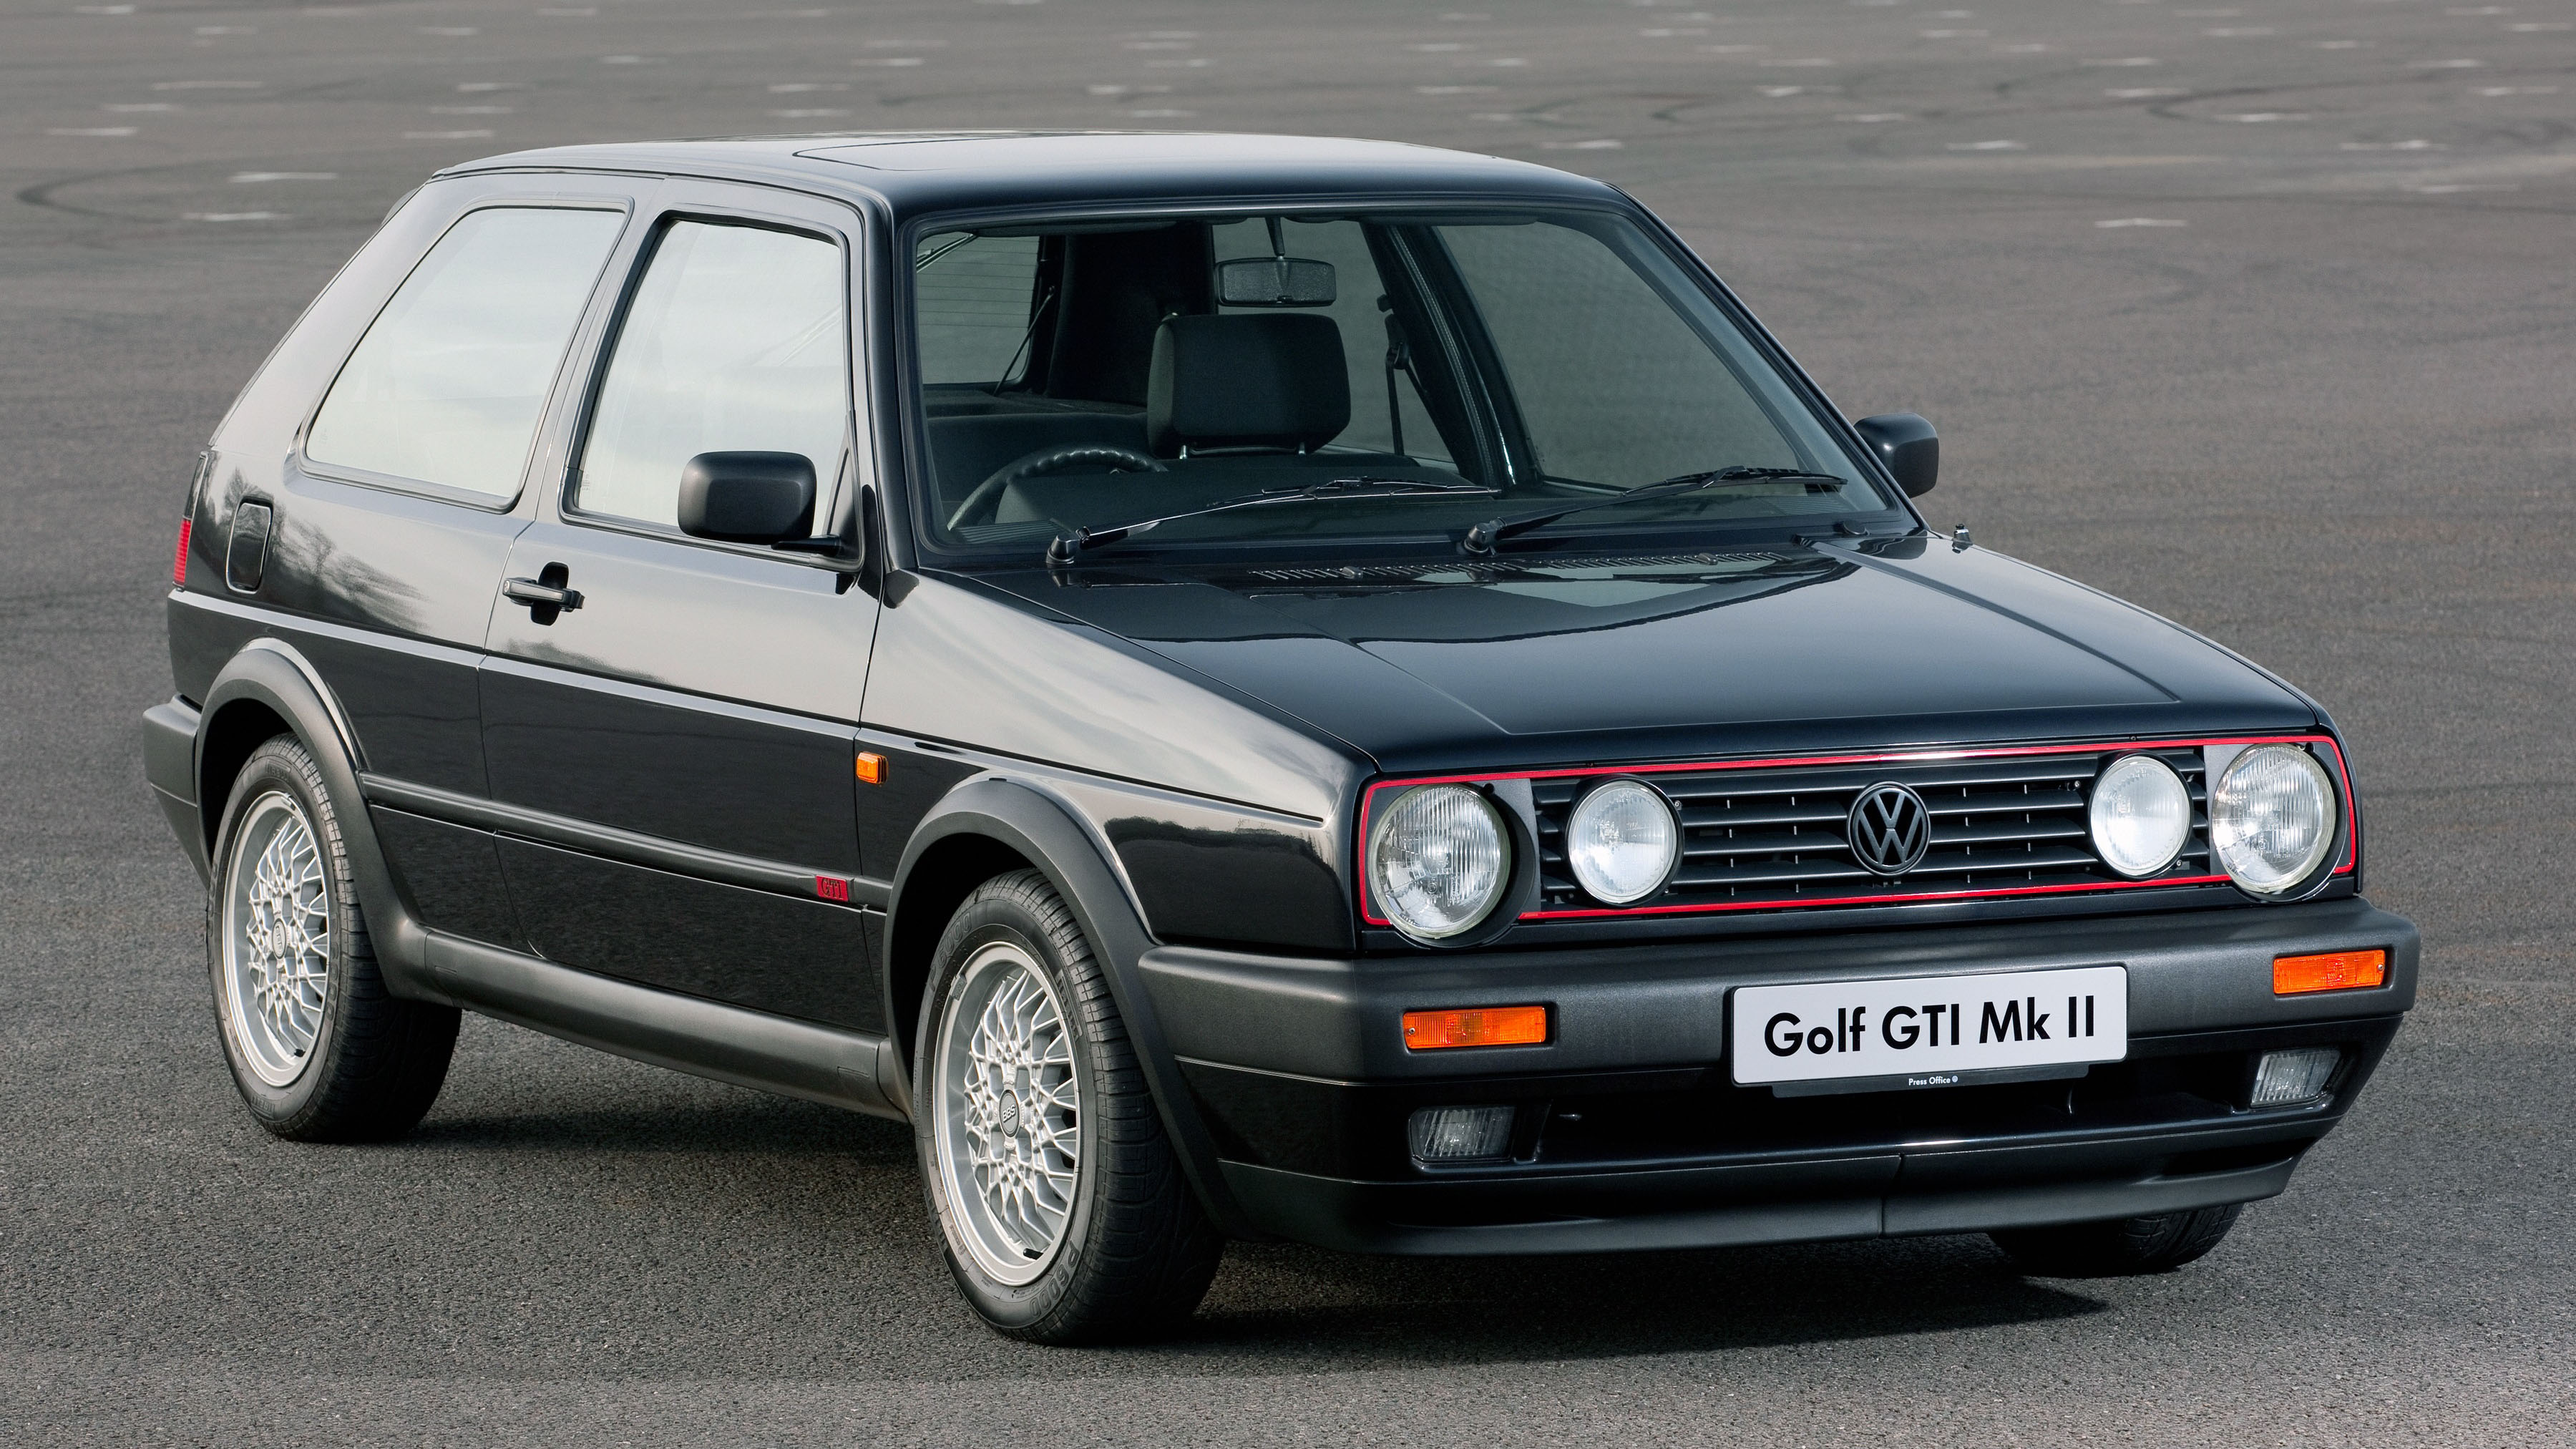 Here are some picture of a perfect VW Golf GTI Mk II